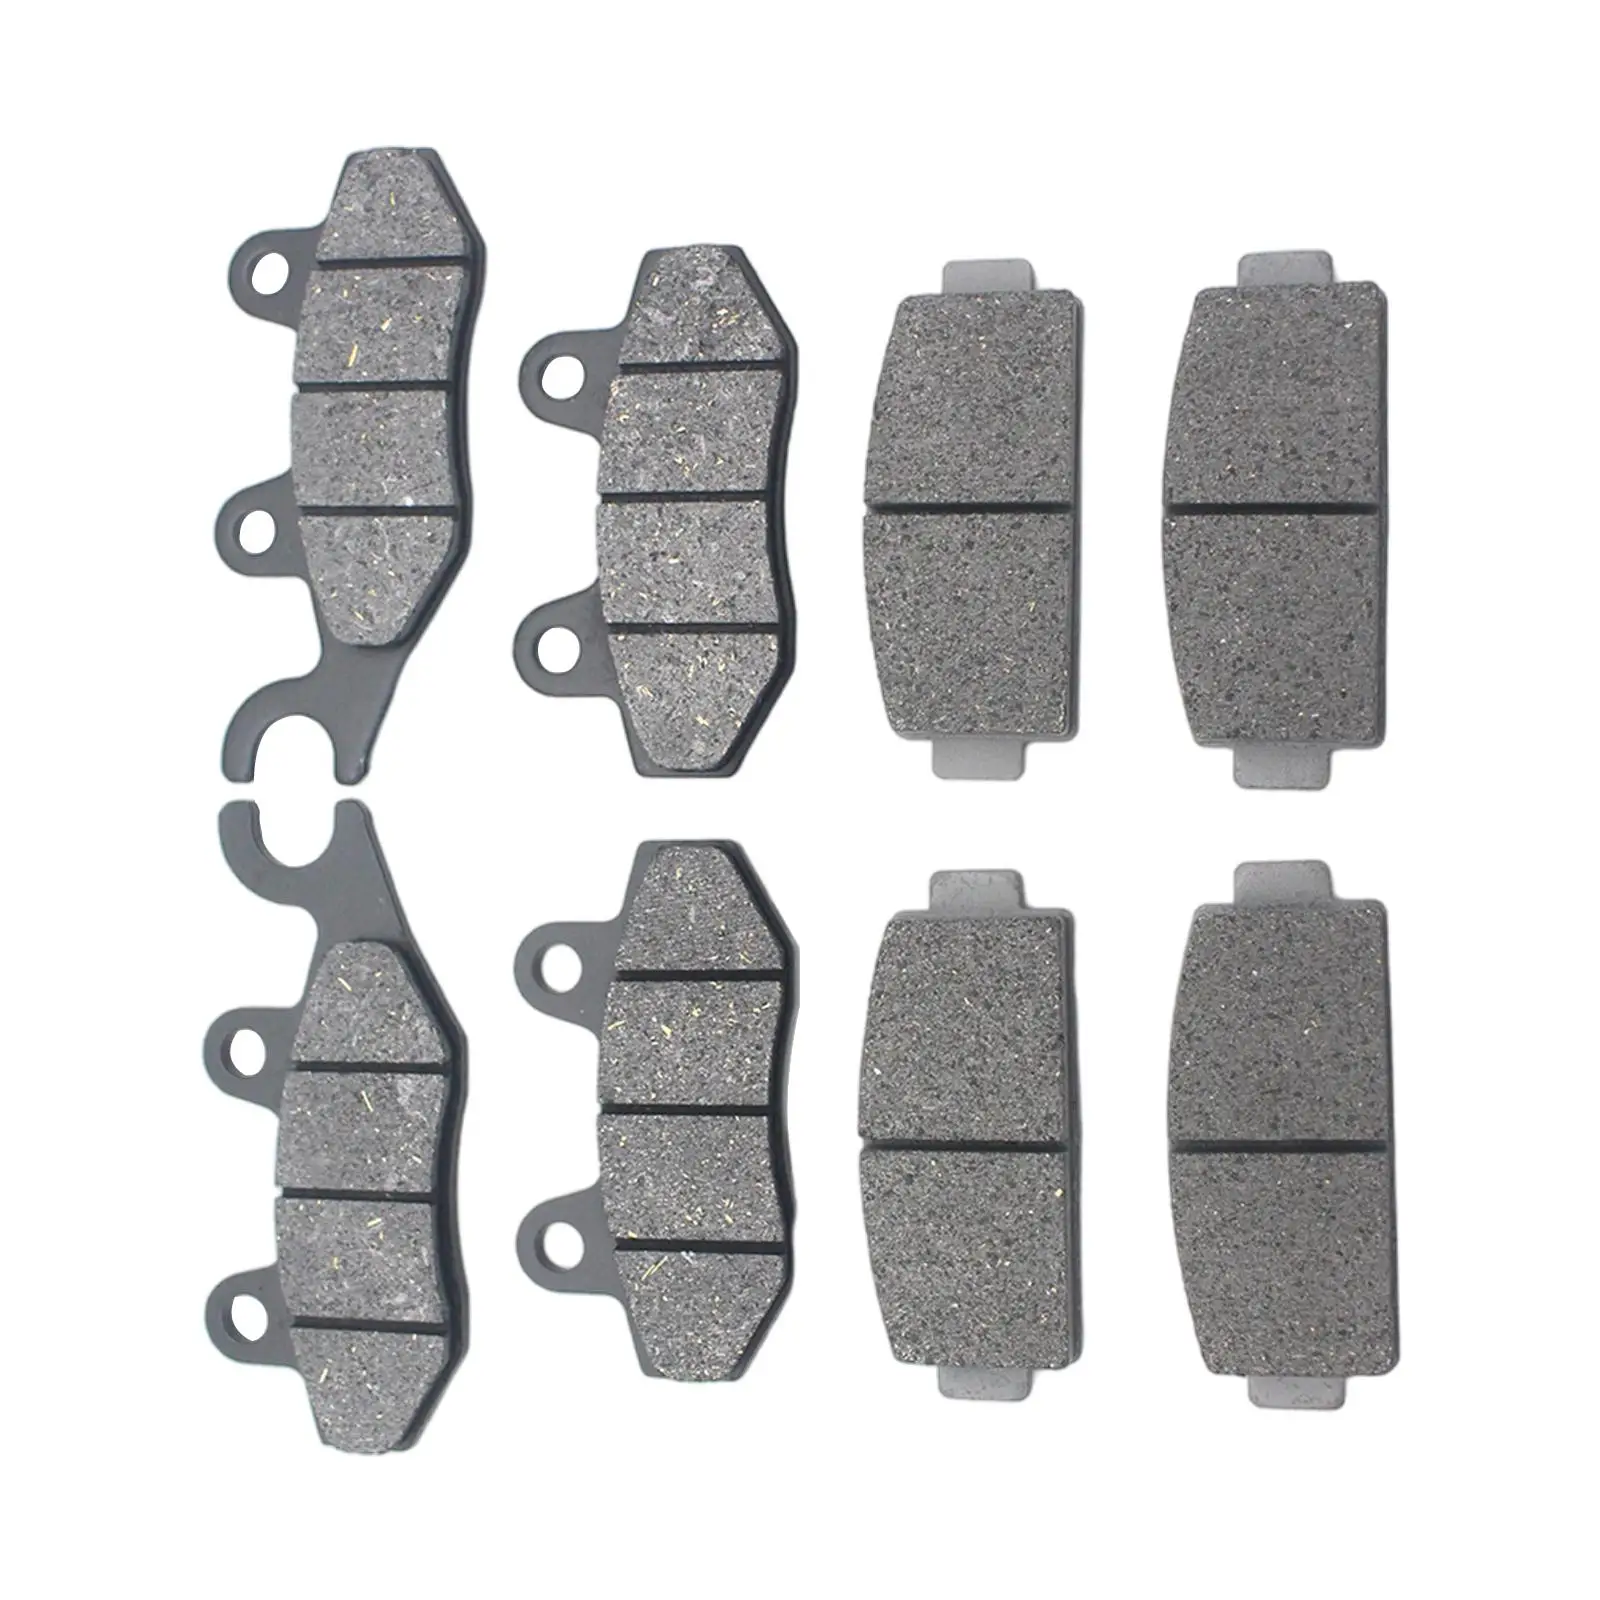 Front Rear Motorcycle Brake Pads for US Z-Force 550 2015 for CF 800 Z-Force Z8 EX 2014-2017 for CF 500 600 800 Fit for CF Moto